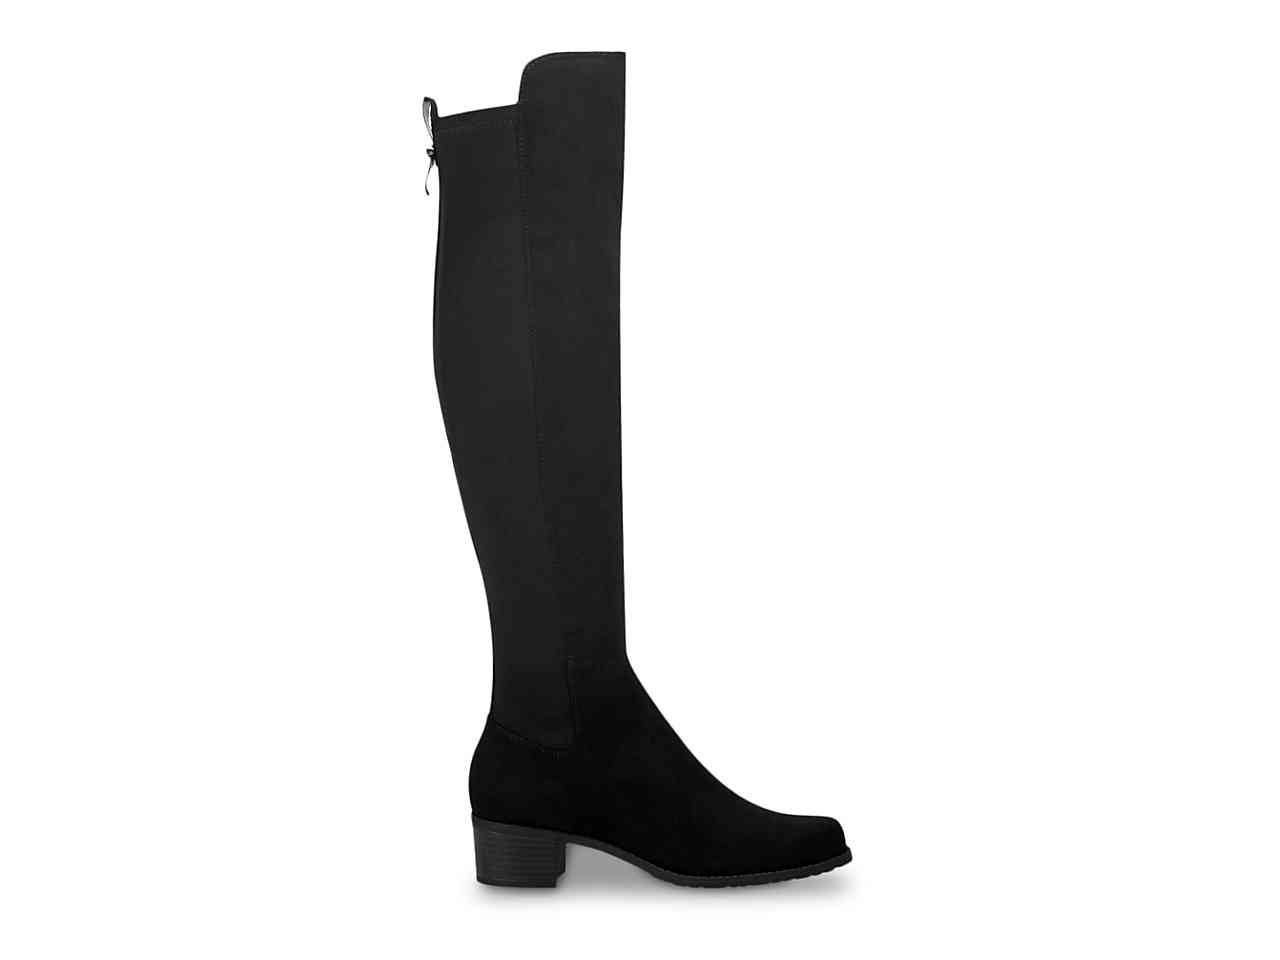 black over the knee boots wide calf